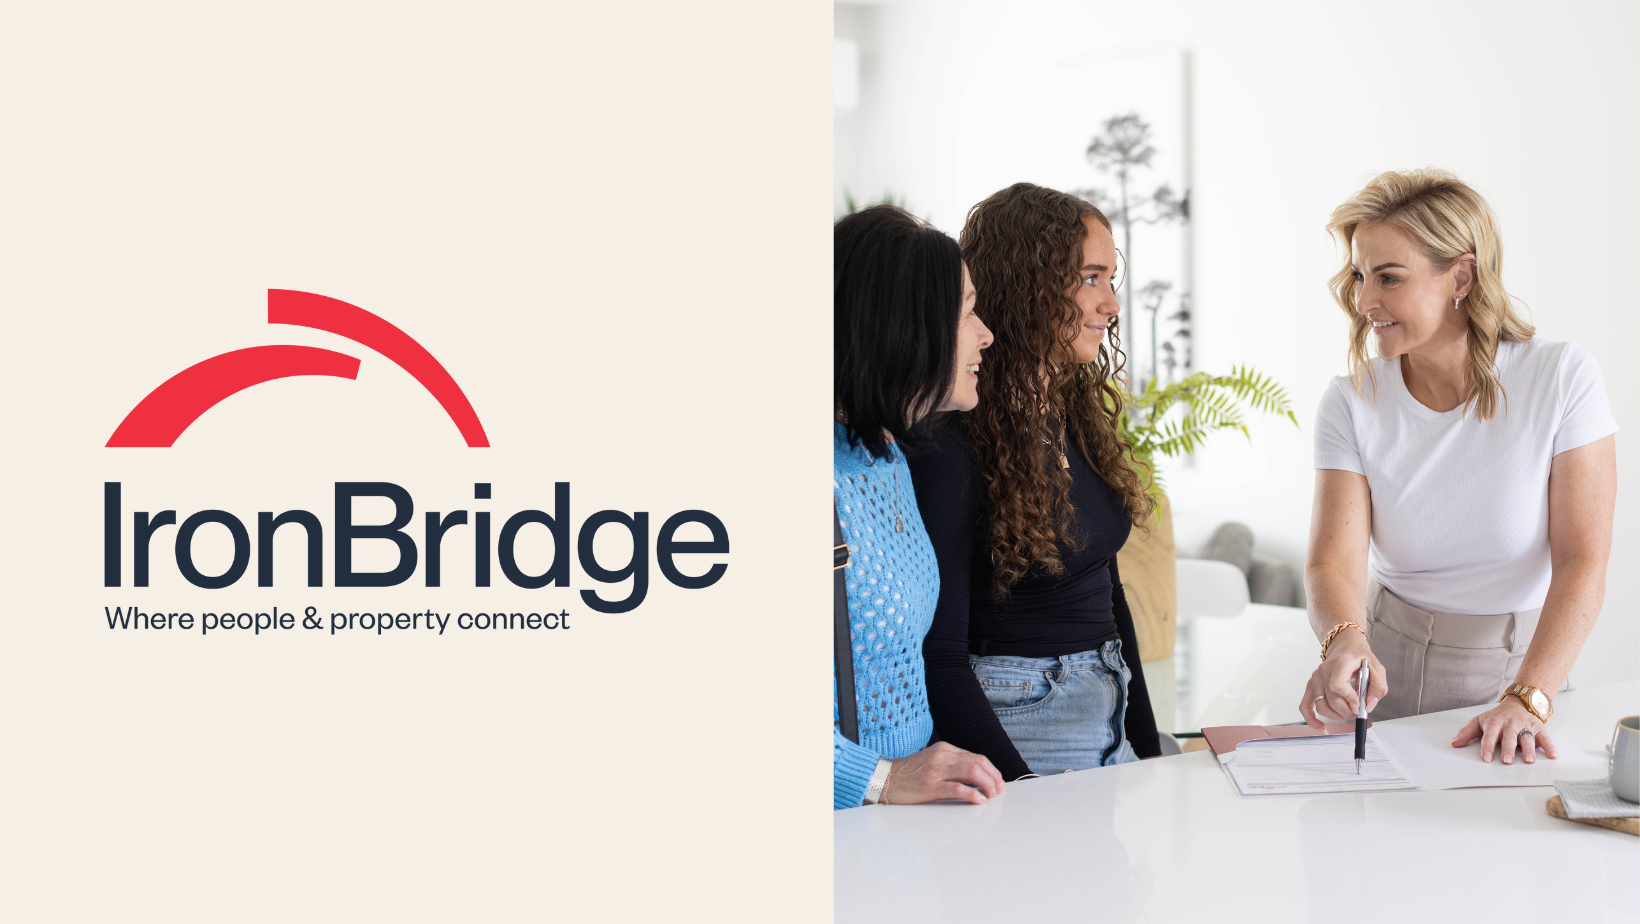 Iron Bridge Launches Refreshed Brand – Enters Exciting New Chapter